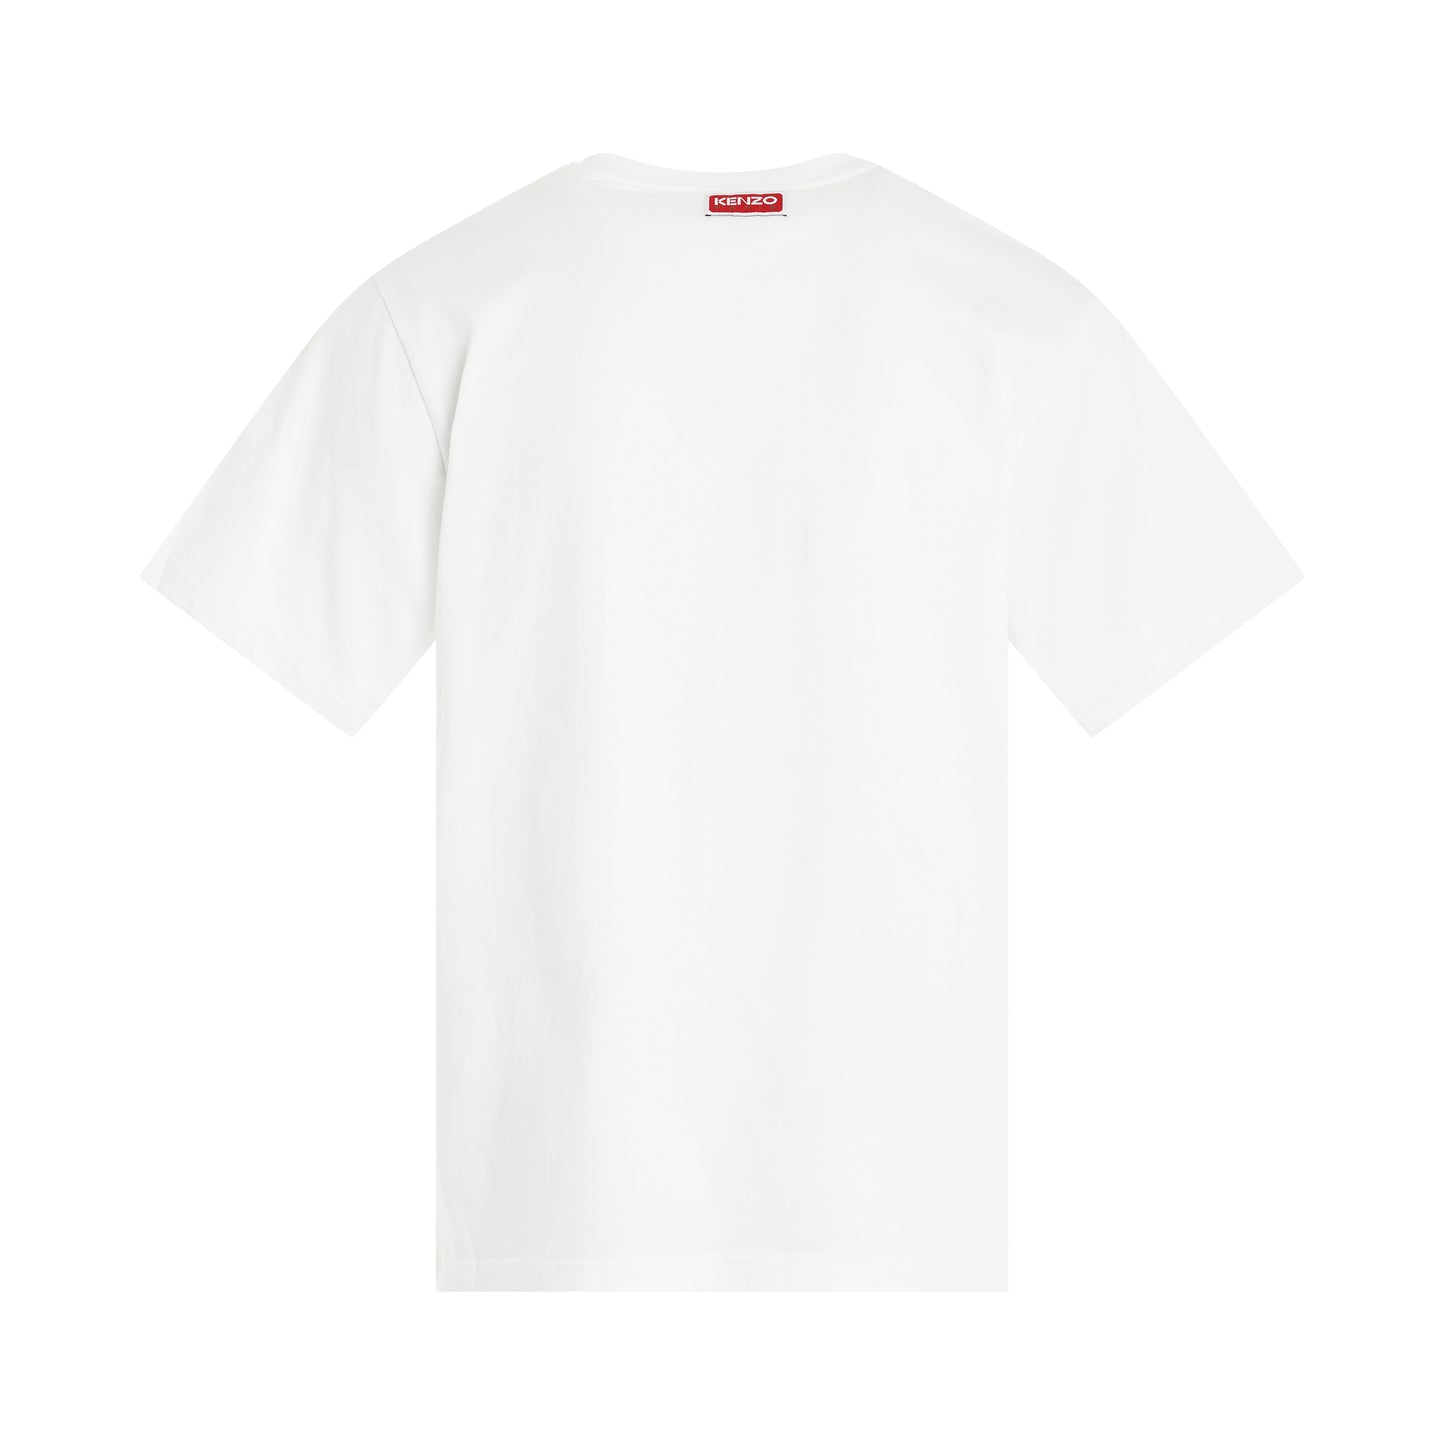 Tiger Varsity Classic T-Shirt in Off White